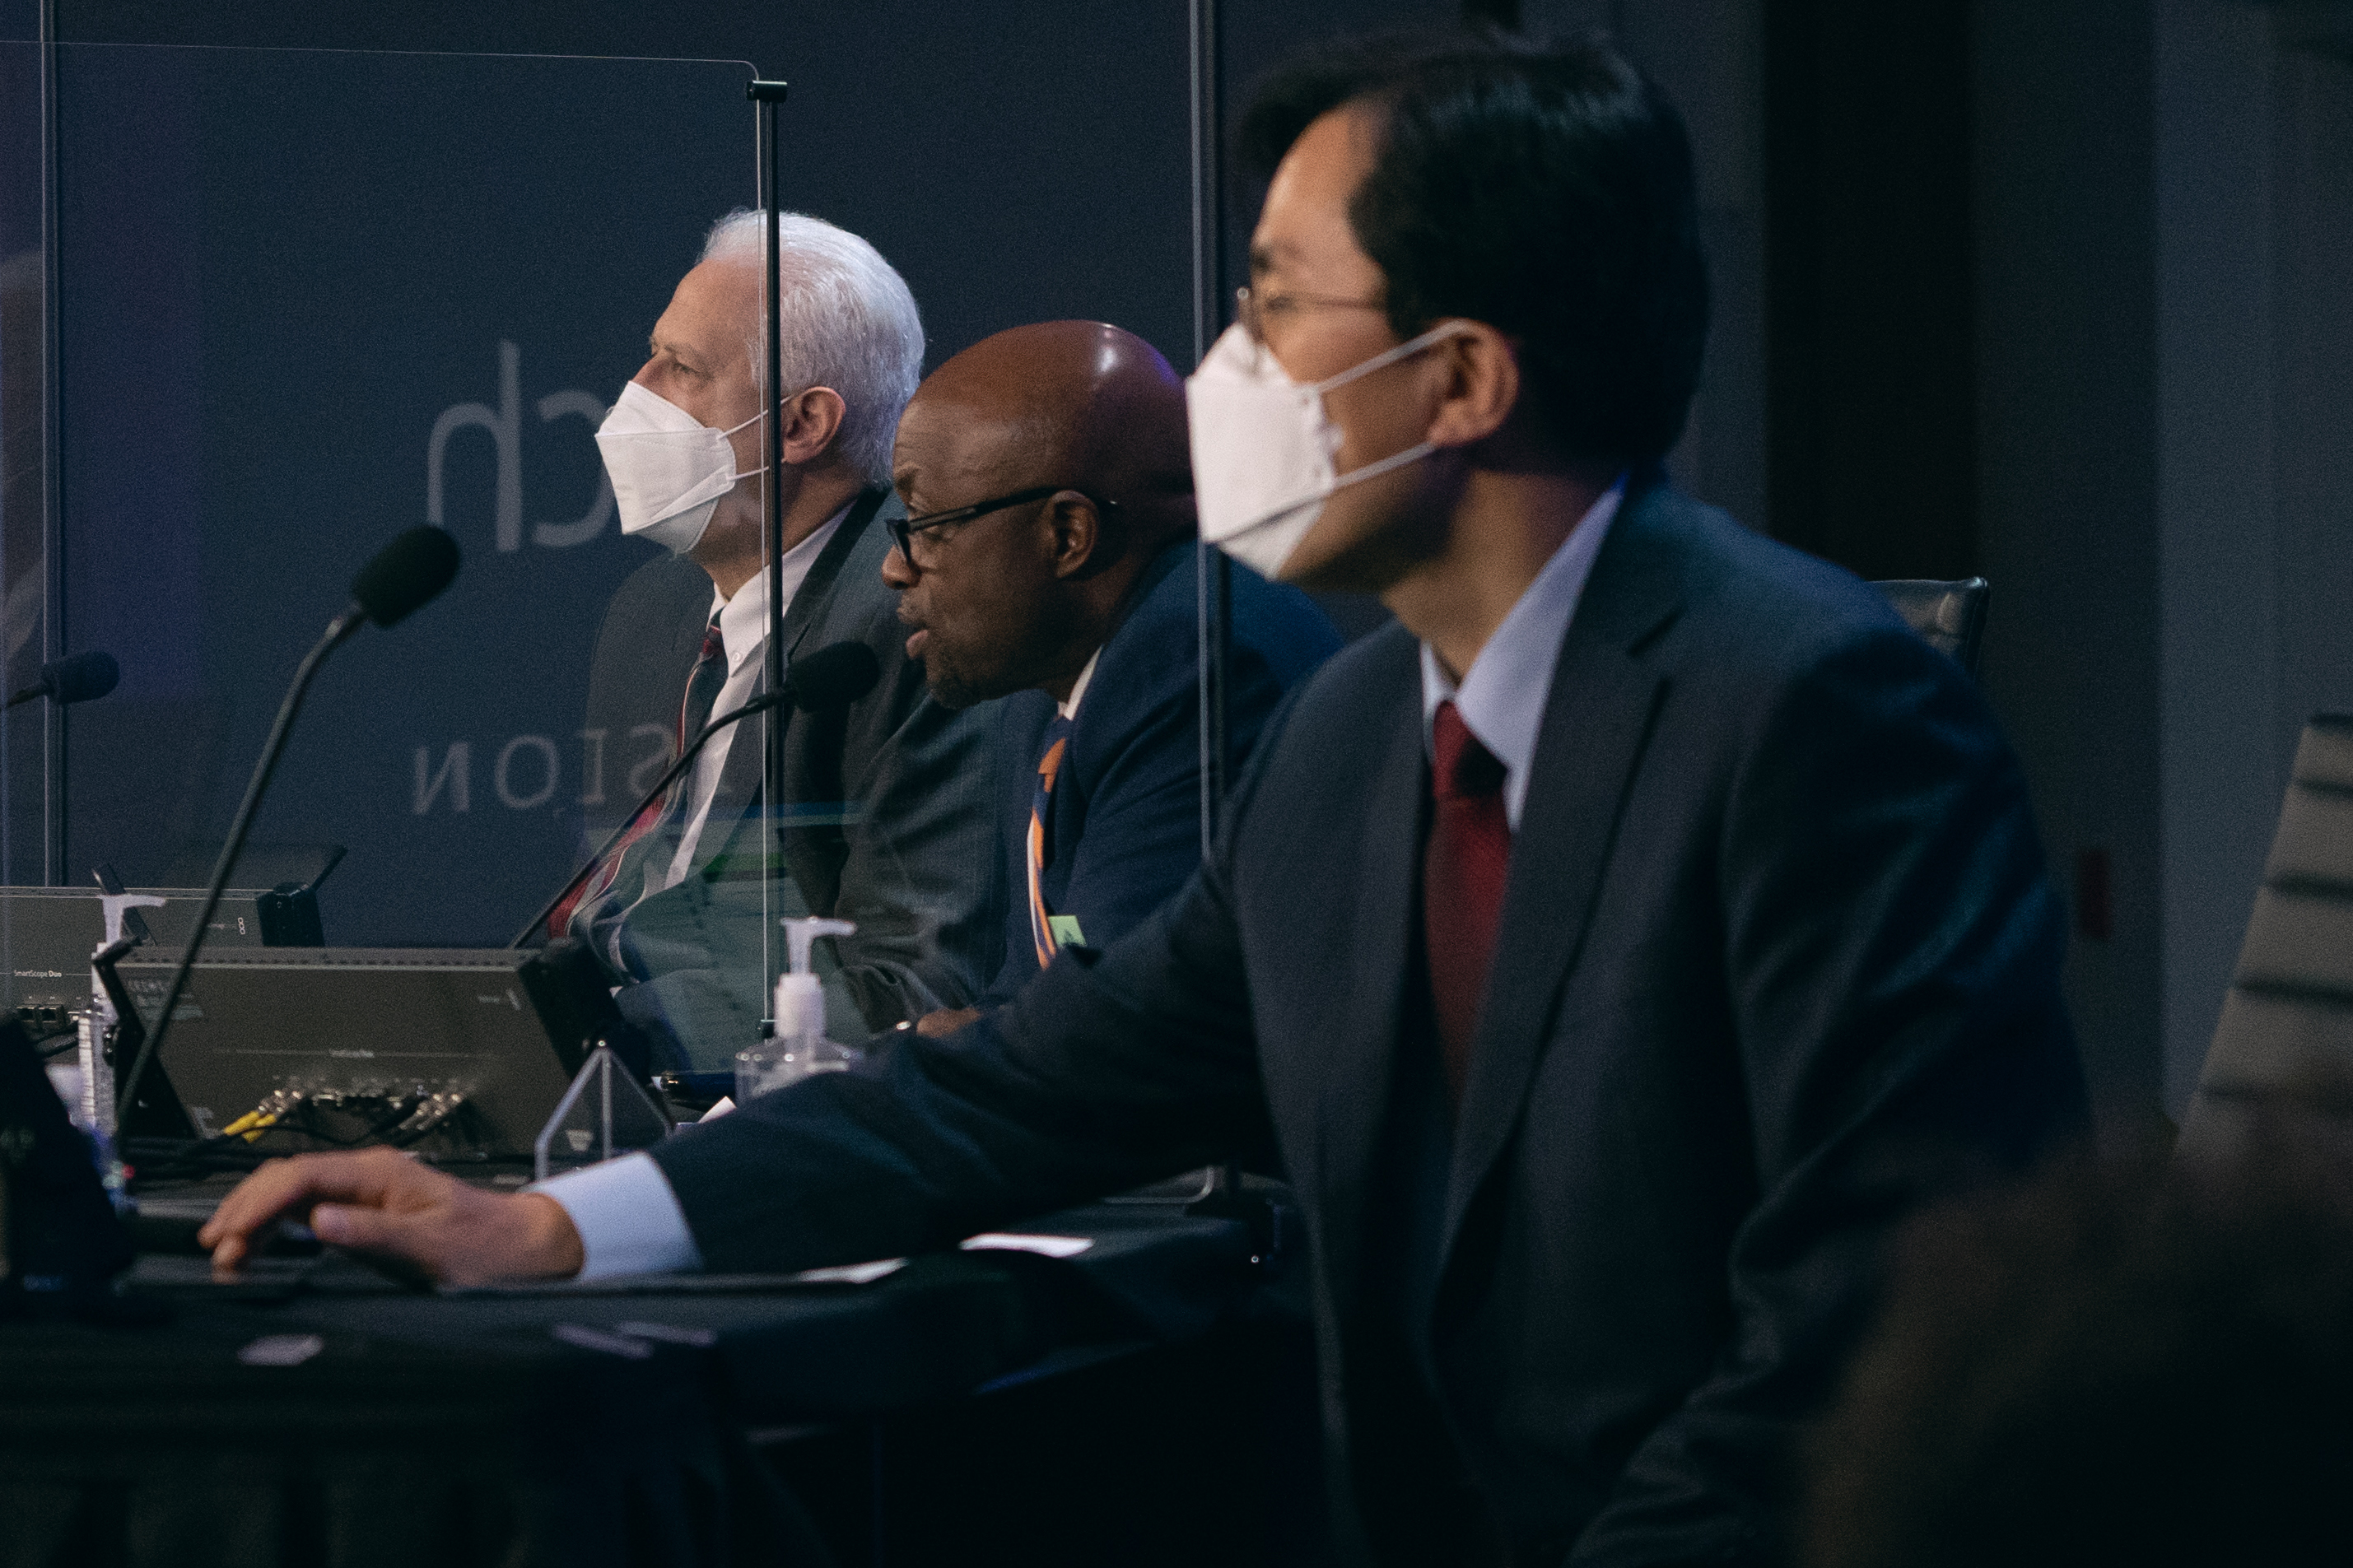 Three officers of the North American Division, Randy Robinson, treasurer; G. Alexander Bryant, president; and Kyoshin Ahn, executive secretary; conduct business during the 2020 NAD Year-End Meeting. Photo: Pieter Damsteegt